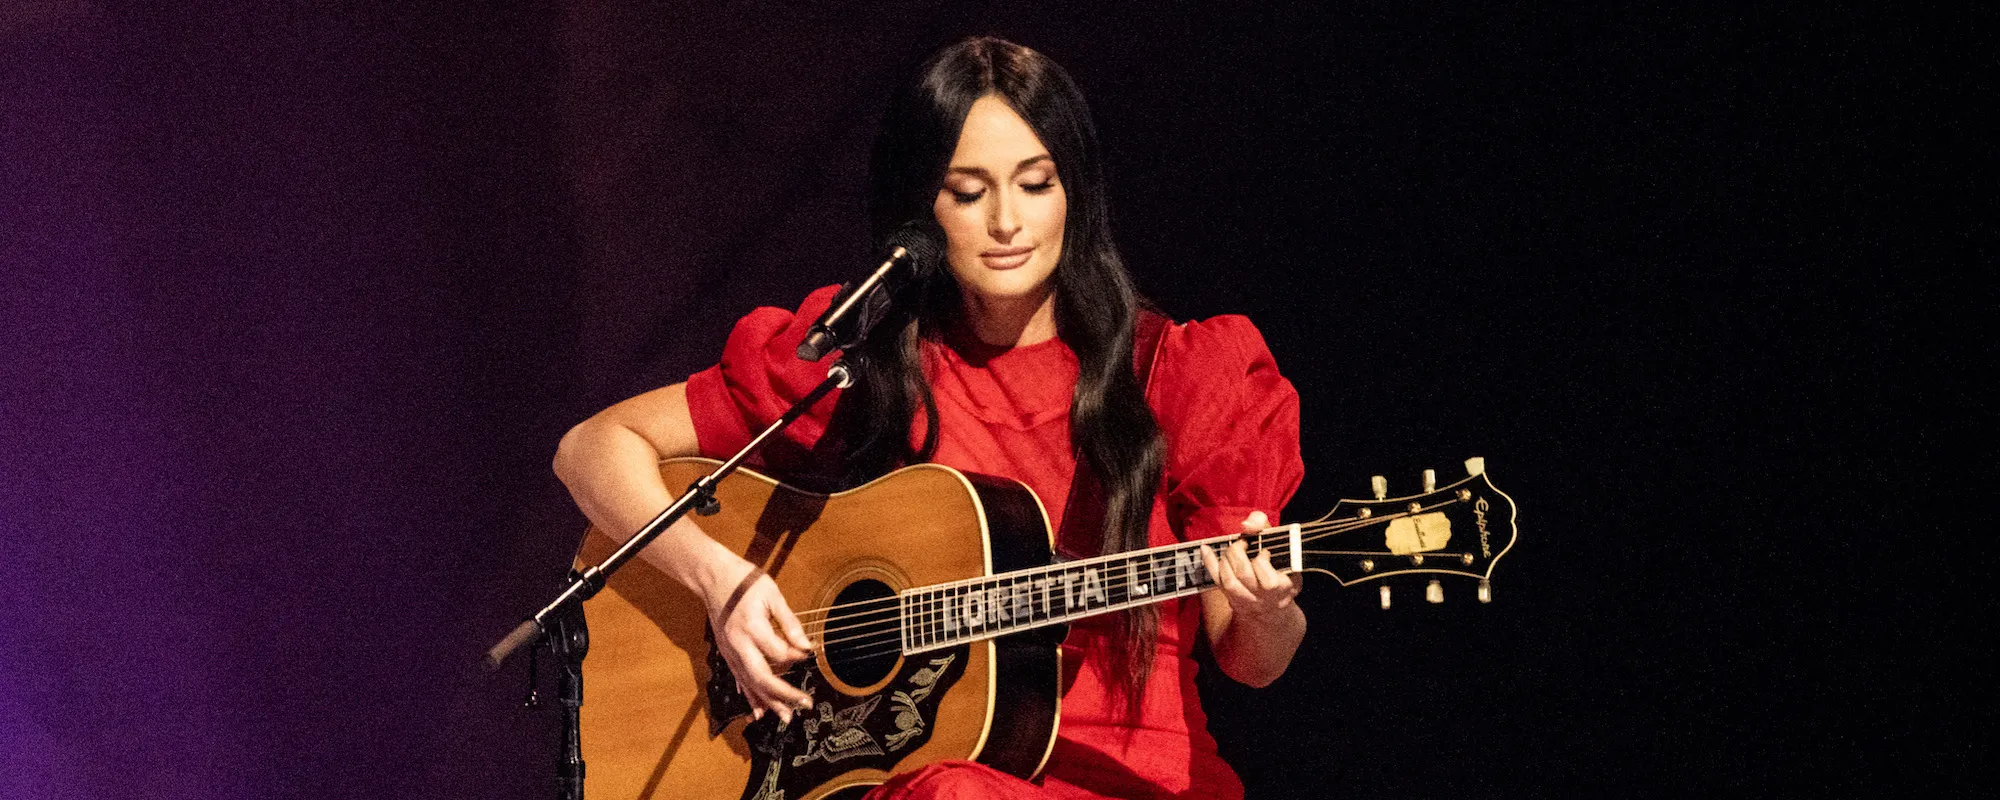 A Charging Stallion, a Breakup, and the Meaning Behind Kacey Musgraves’ Grammy-Winning “Space Cowboy”